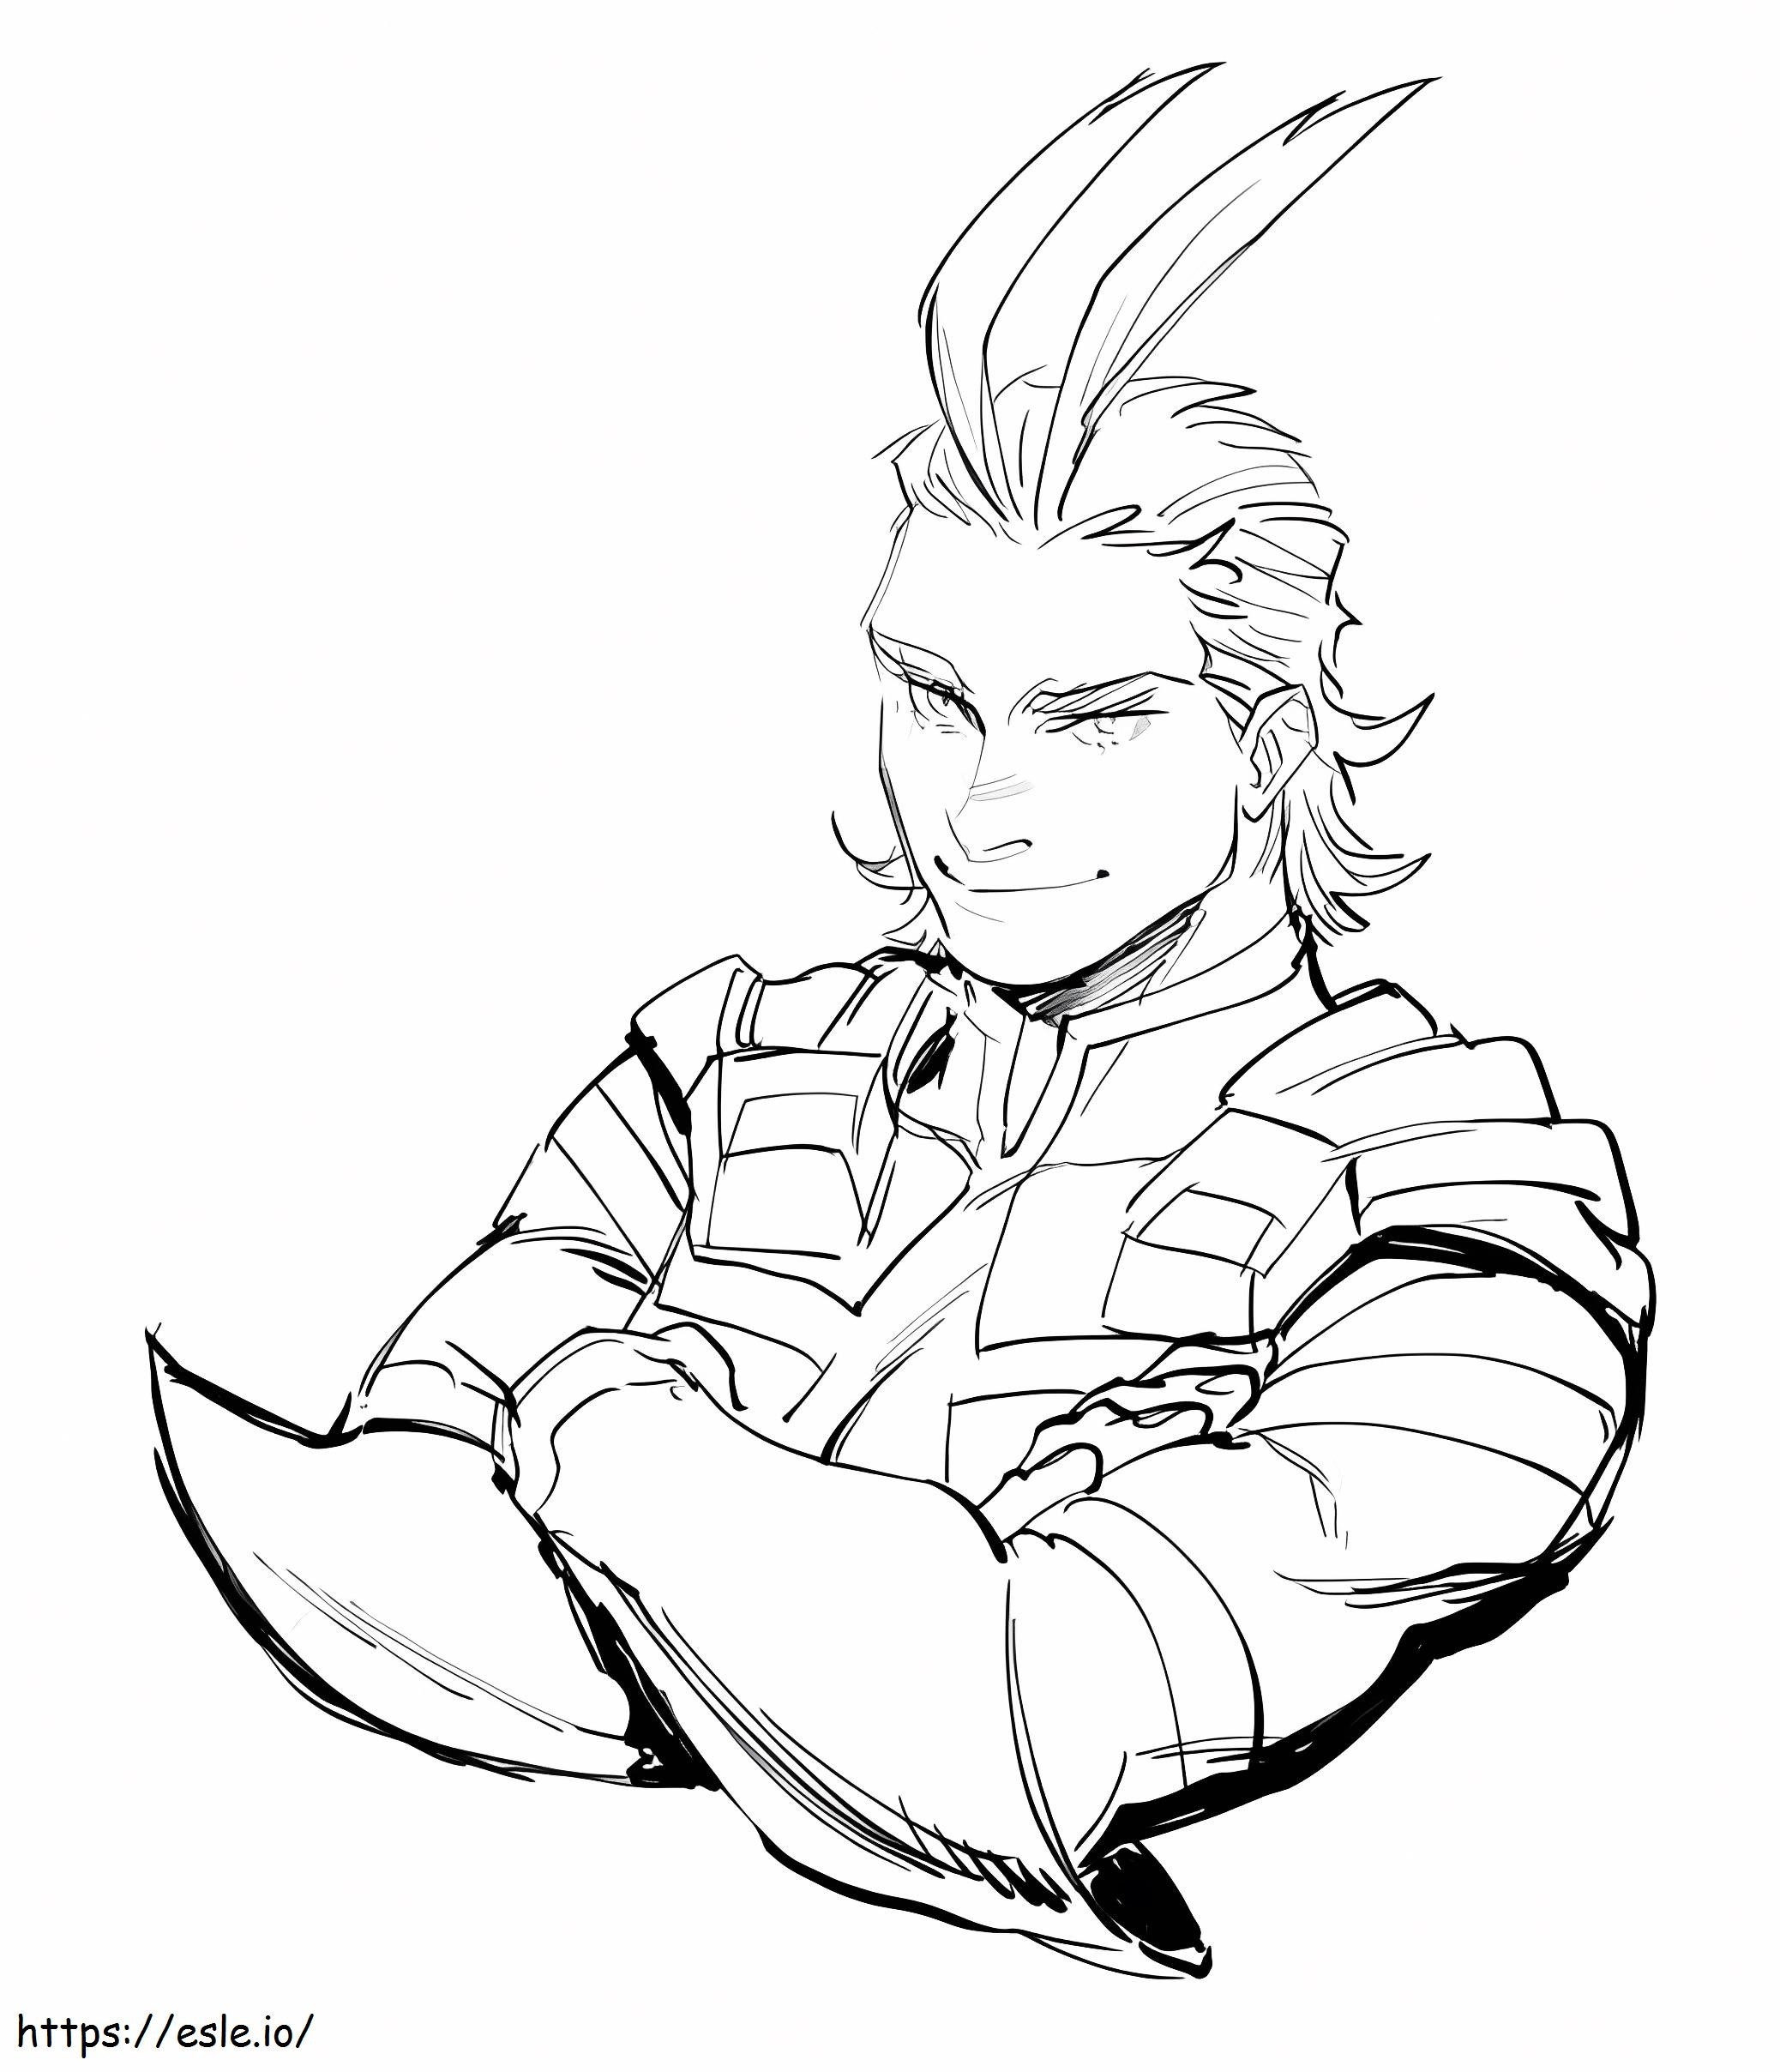 Face All Might coloring page